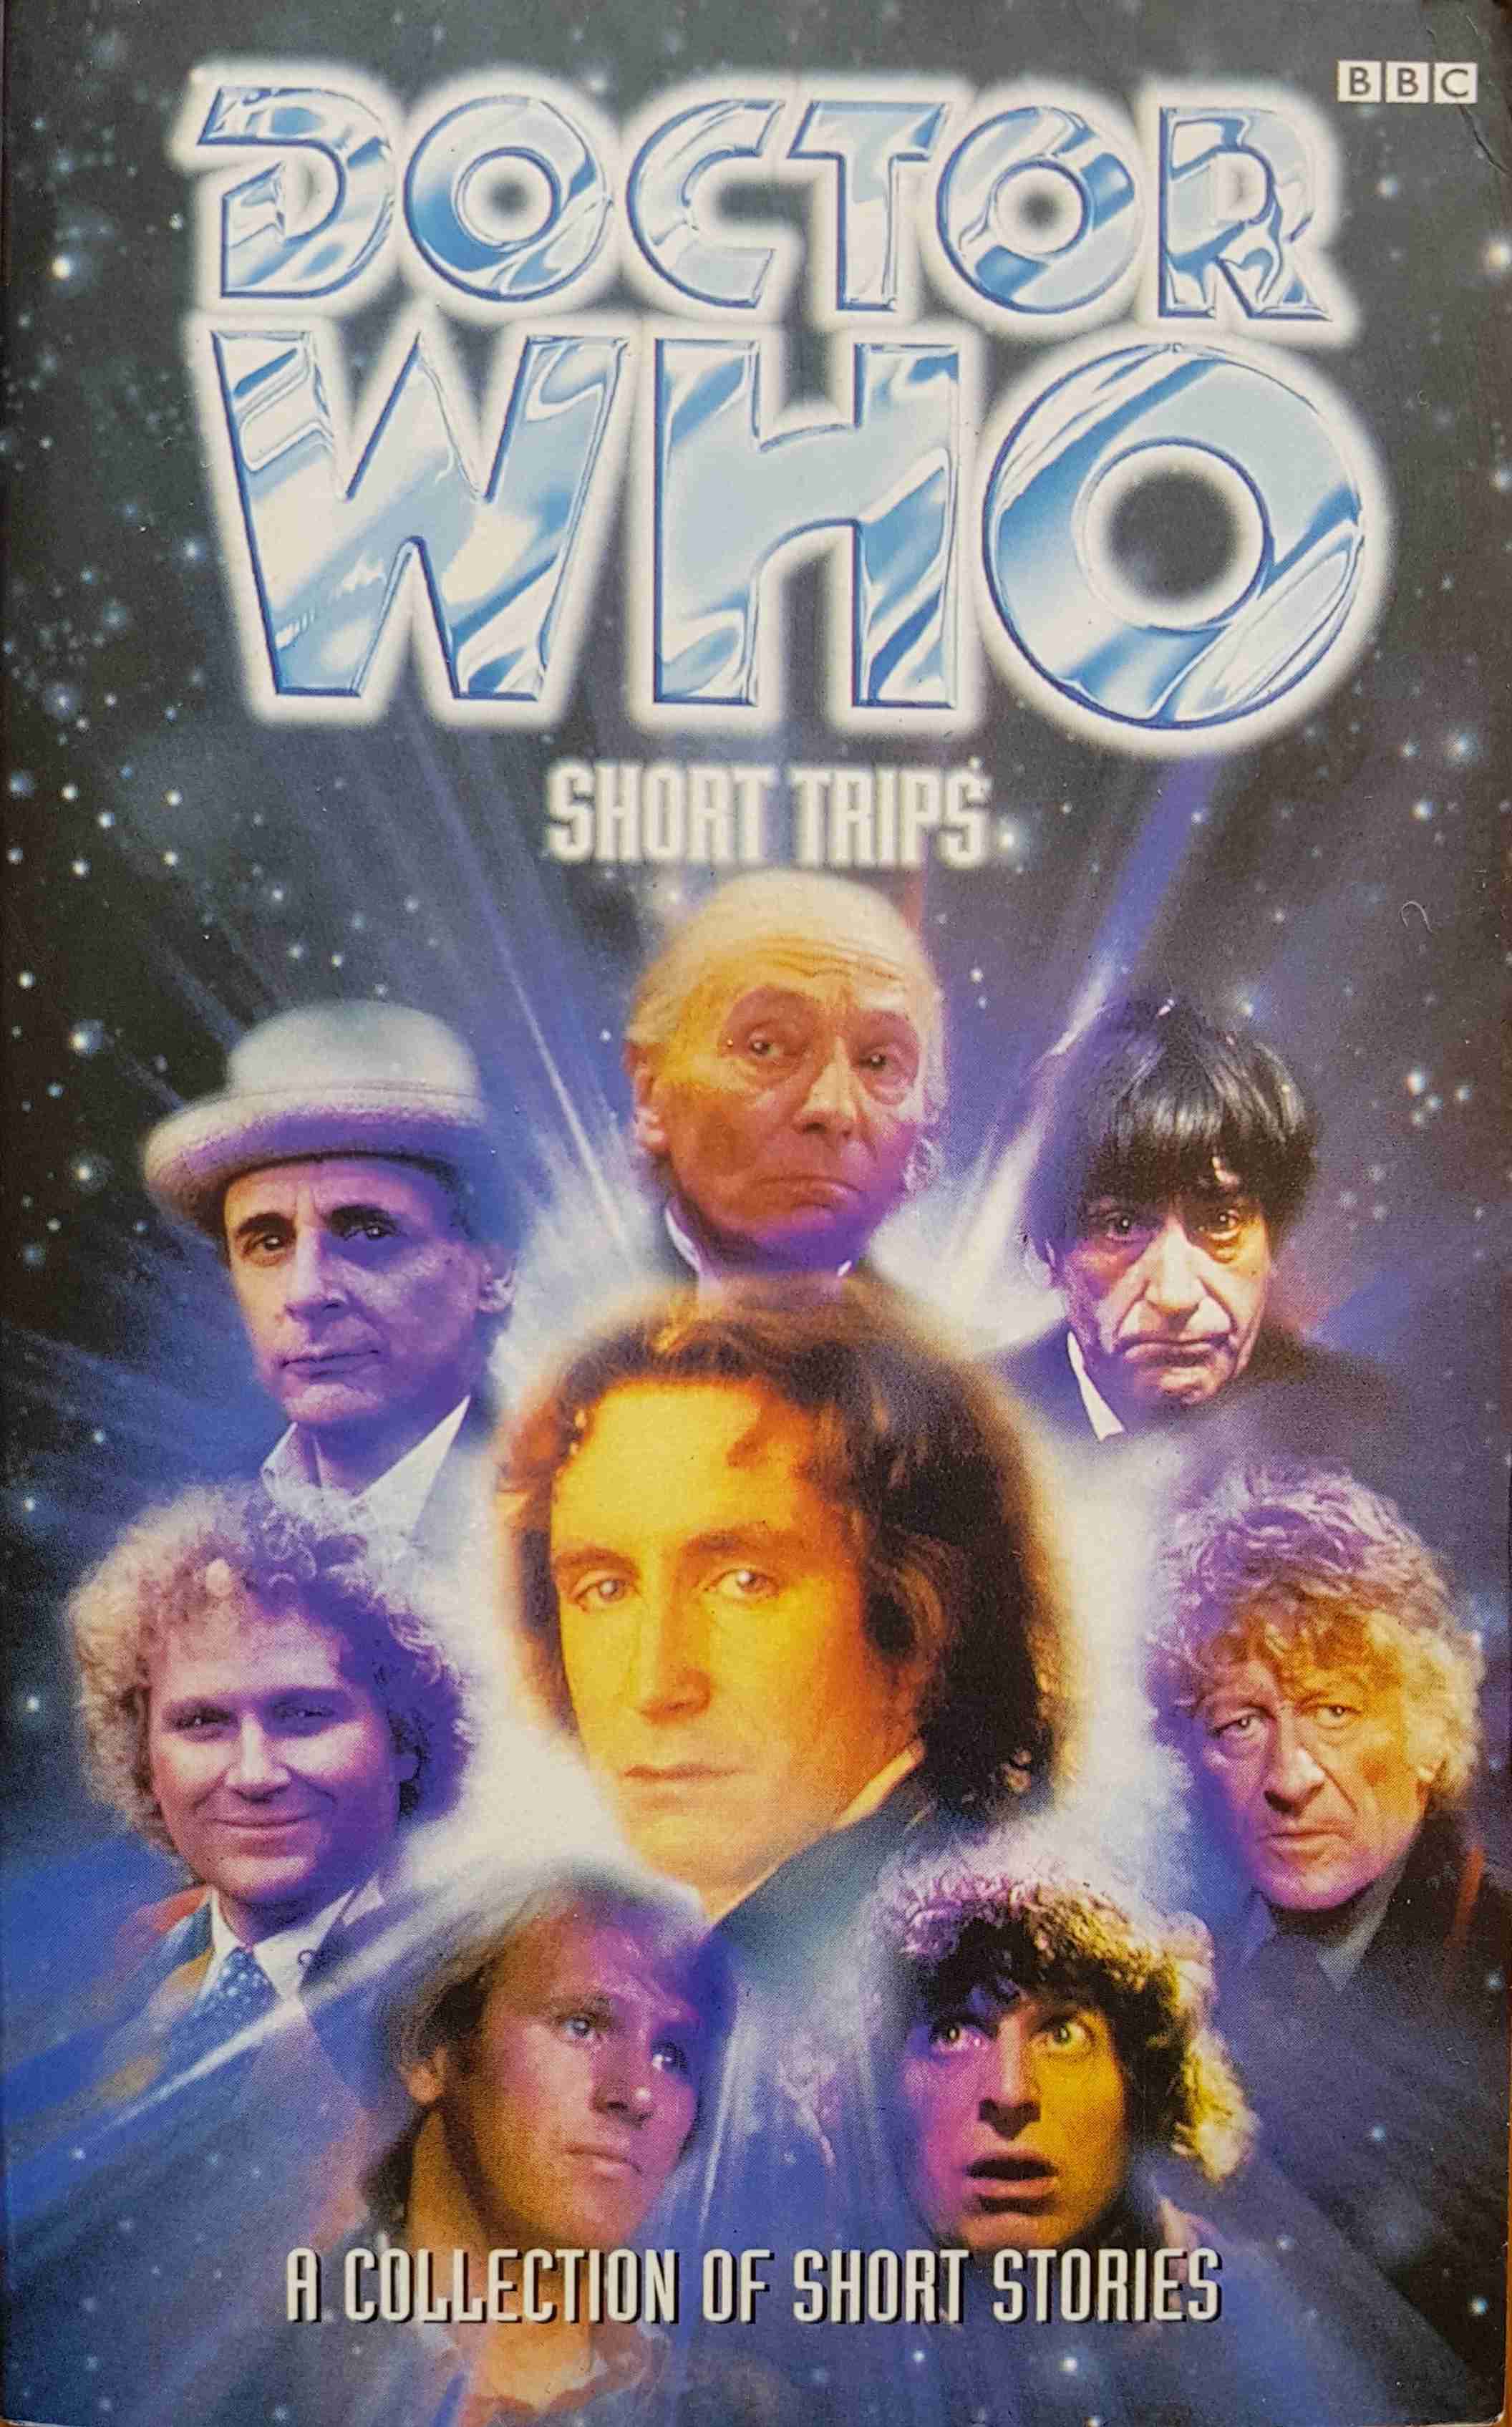 Picture of 0-563-40560-0 Doctor Who - Short trips (Autographed) by artist Various from the BBC books - Records and Tapes library